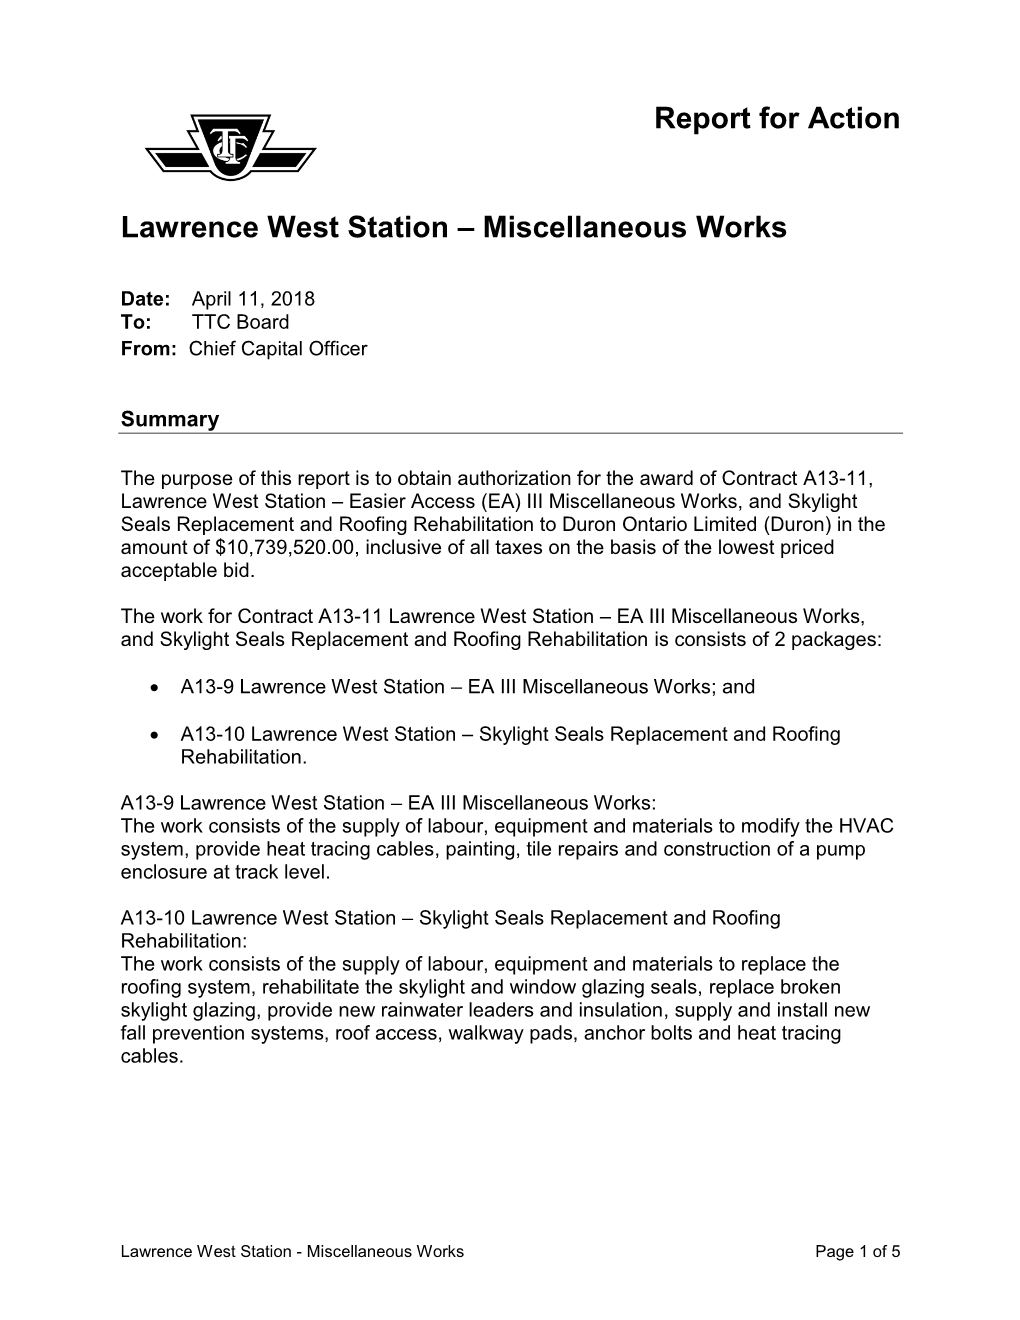 Lawrence West Station – Miscellaneous Works